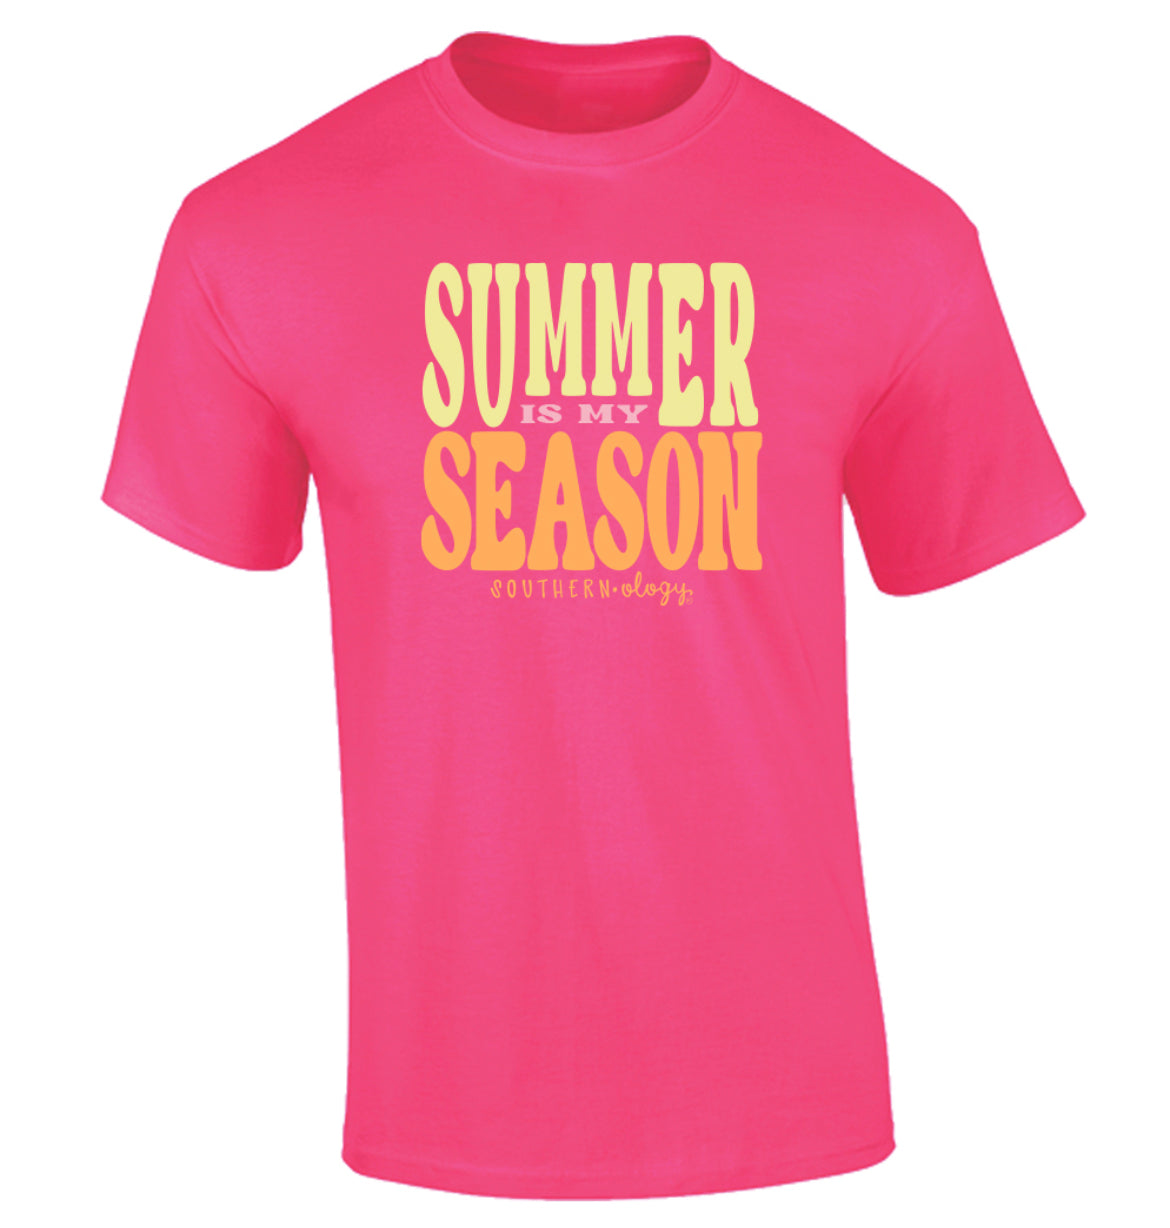 Southernologt SS Summer Is My Season Tshirt*